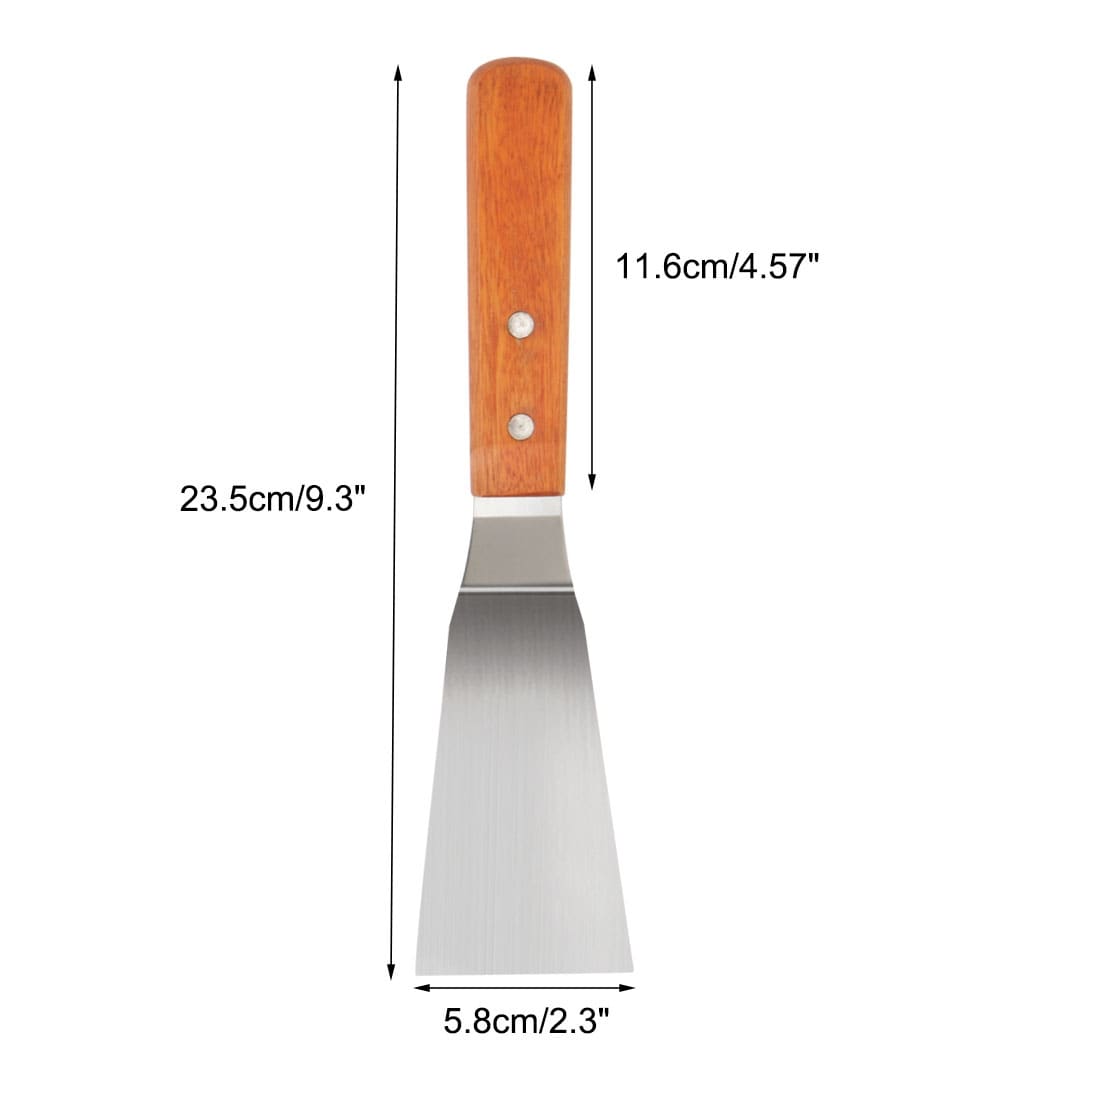 Slotted Griddle Spatula Grill Spatula Dessert Cutter Lasagna Turner White  Handle Baking Cooking Serving Utensils Home - Bed Bath & Beyond - 31428942